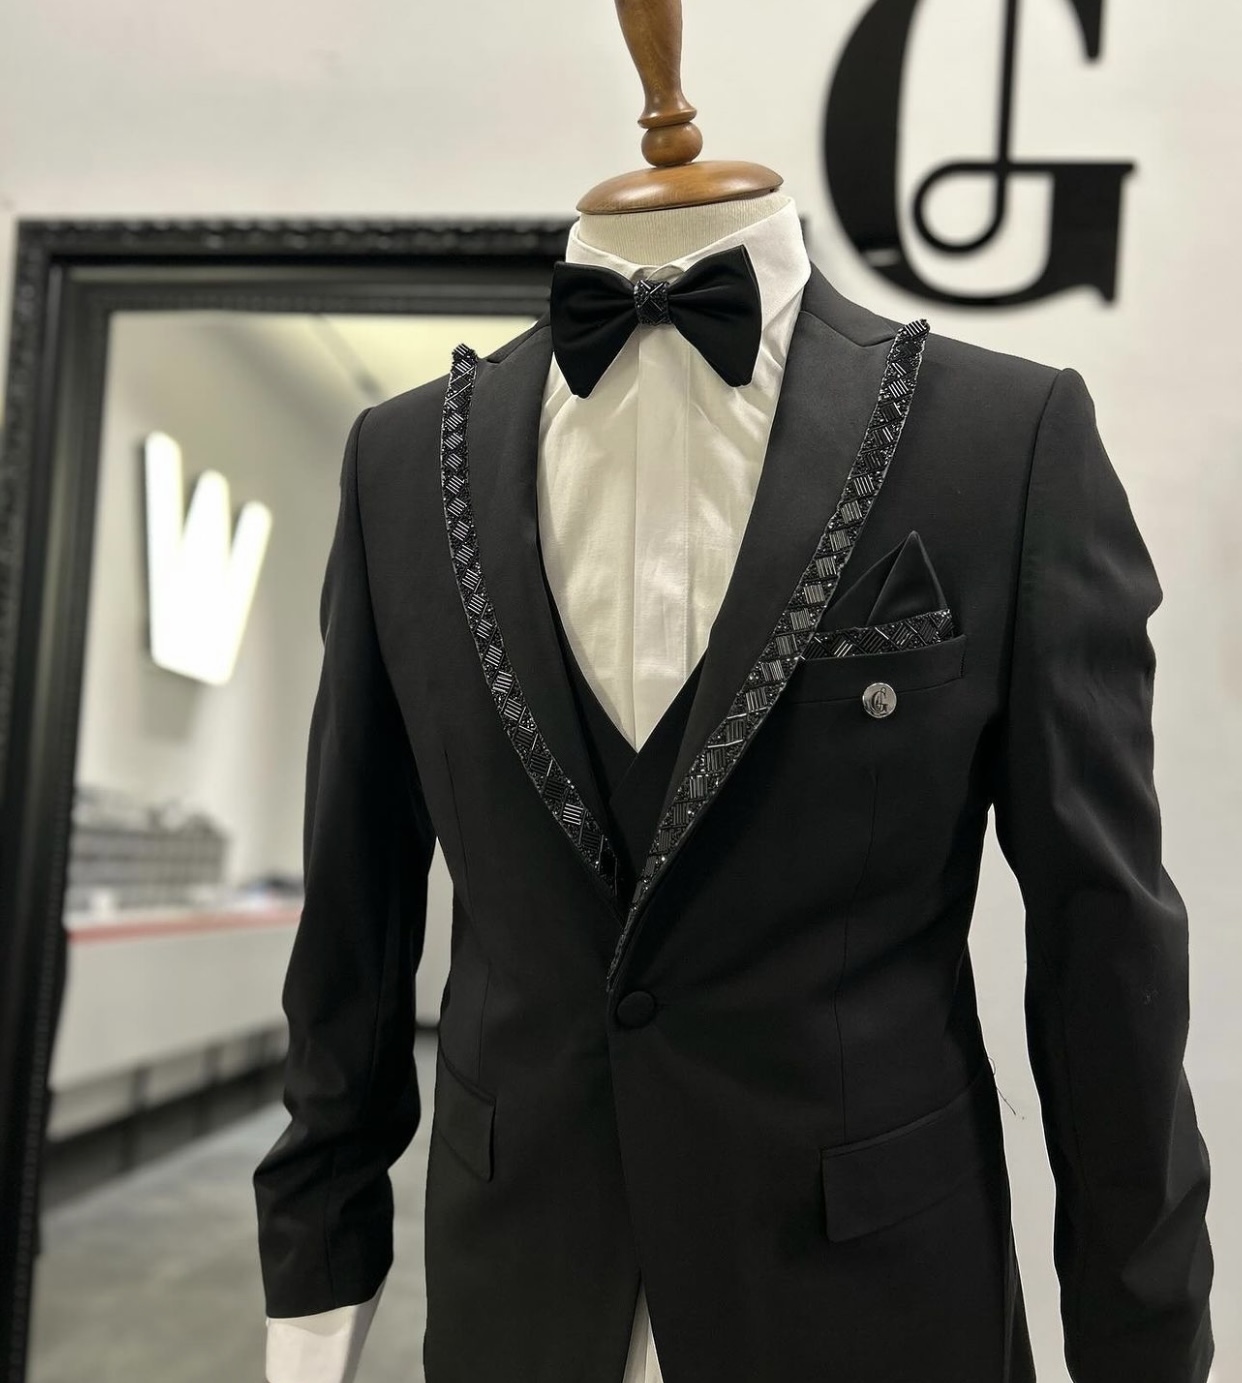 Worlds most expensive bespoke suits and fashion for Men - Slaylebrity